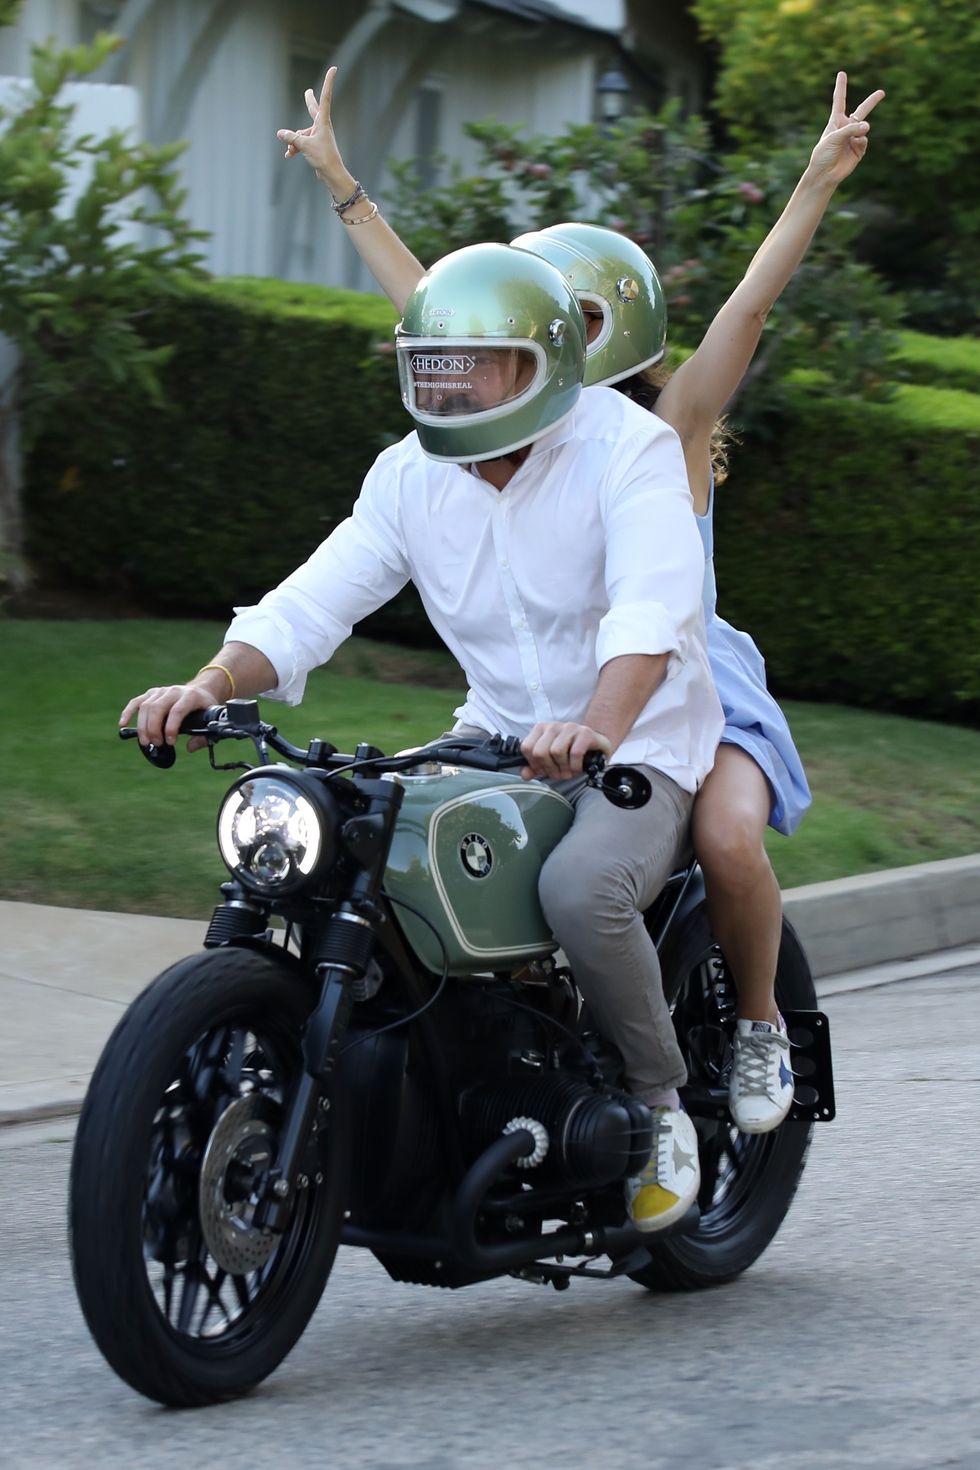 ben and ana wearing green motorcycle helmets while riding a green bmw motorcycle through a neighborhood ana throws both her hands up in the back to gesture peace signs